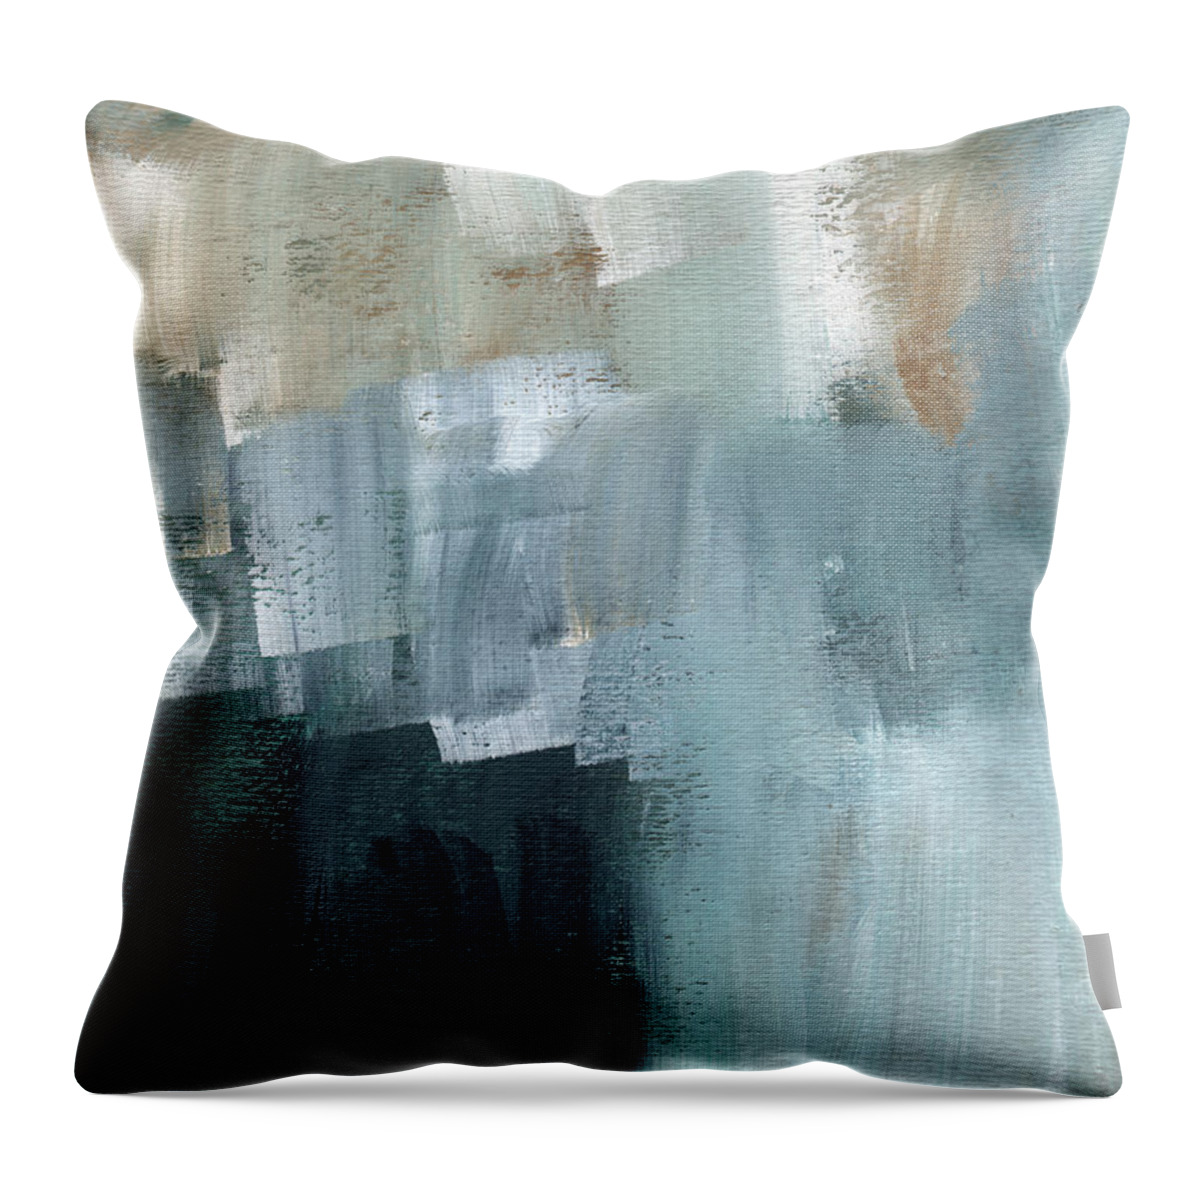 Abstract Art Throw Pillow featuring the painting Days Like This - Abstract Painting by Linda Woods